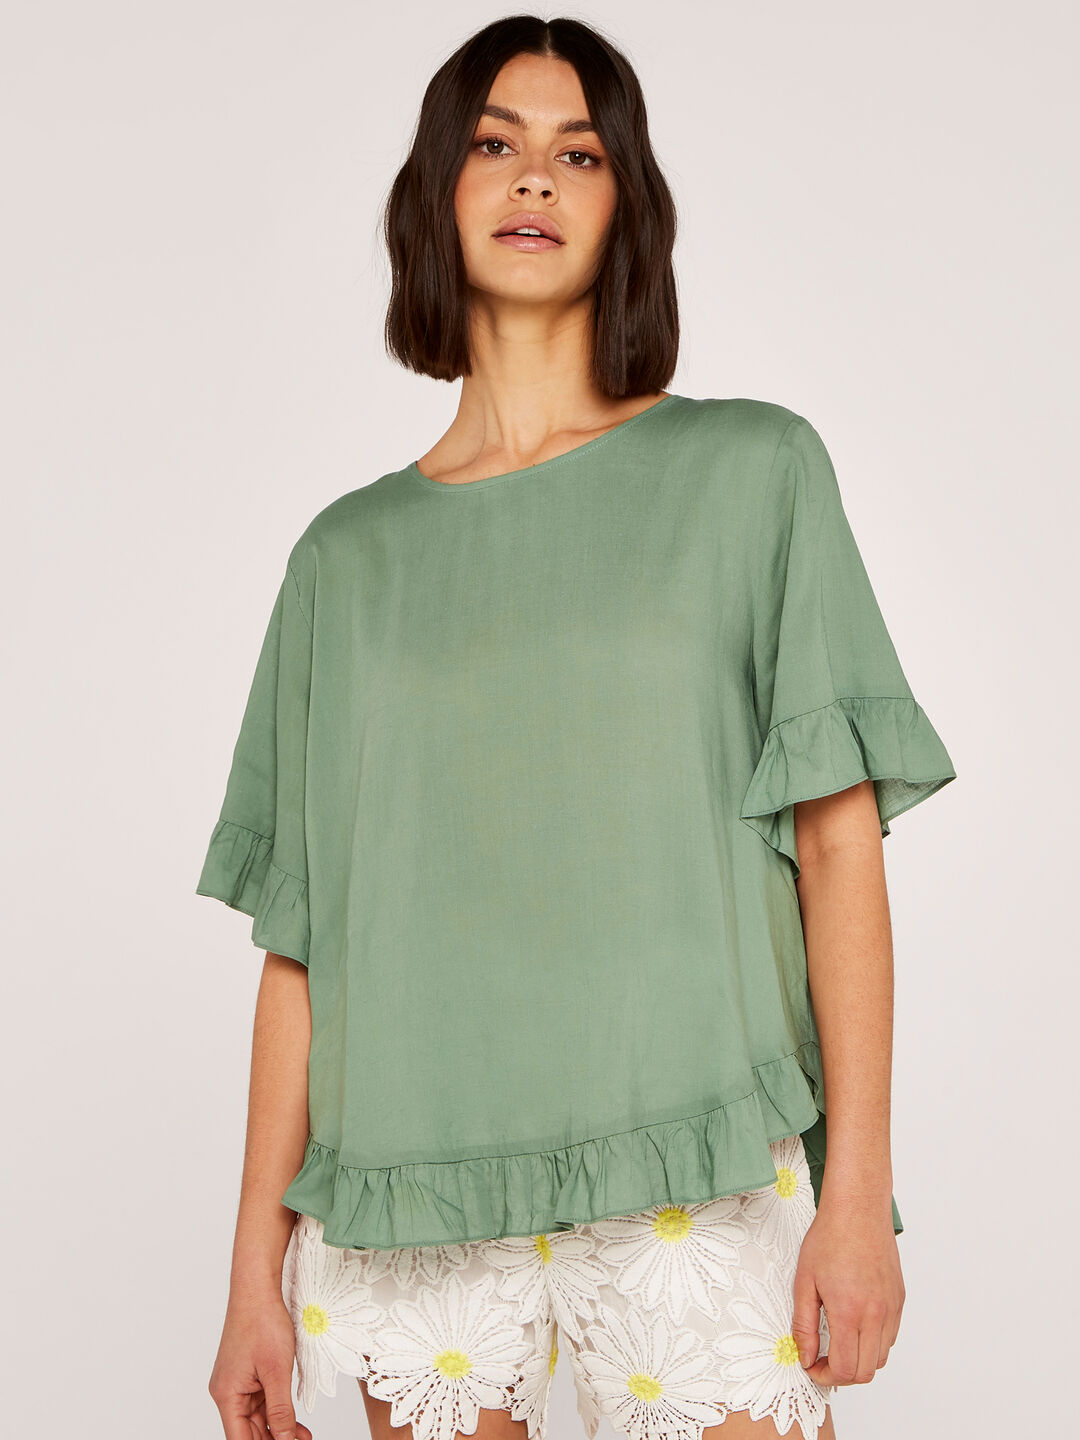 Frill Detail Top